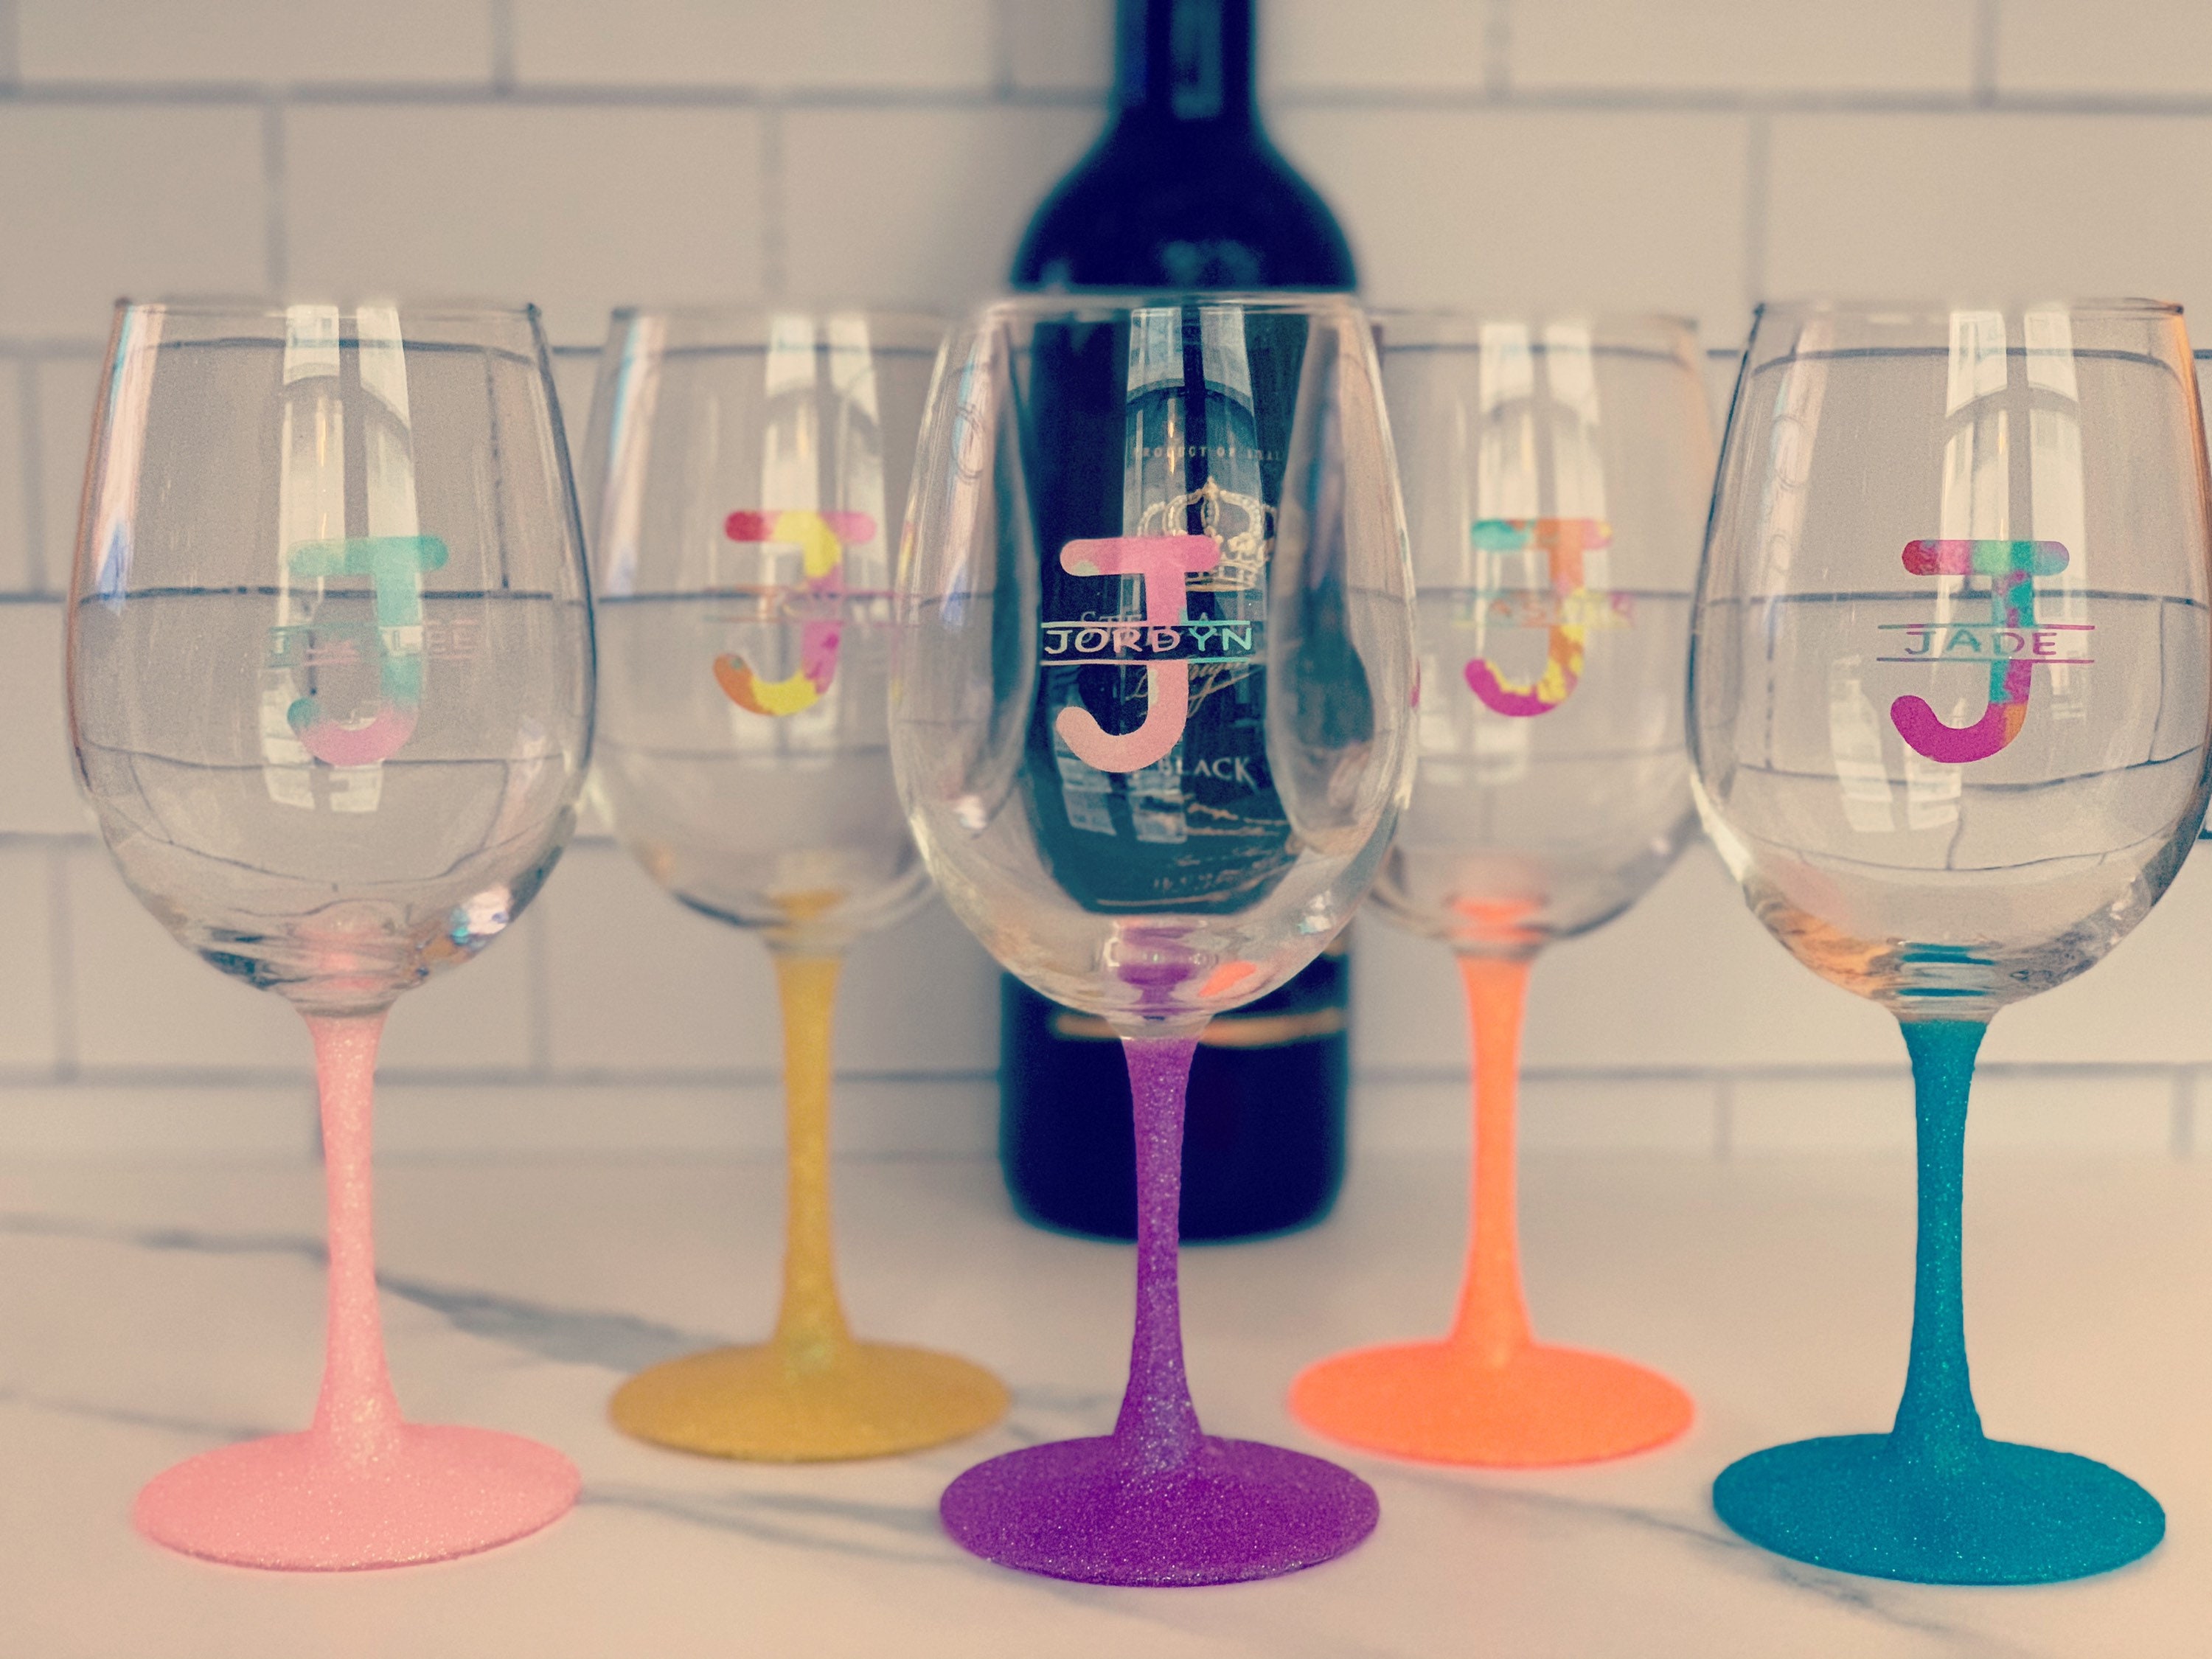 Girly wine glasses & mug for Sale in Parma Heights, OH - OfferUp